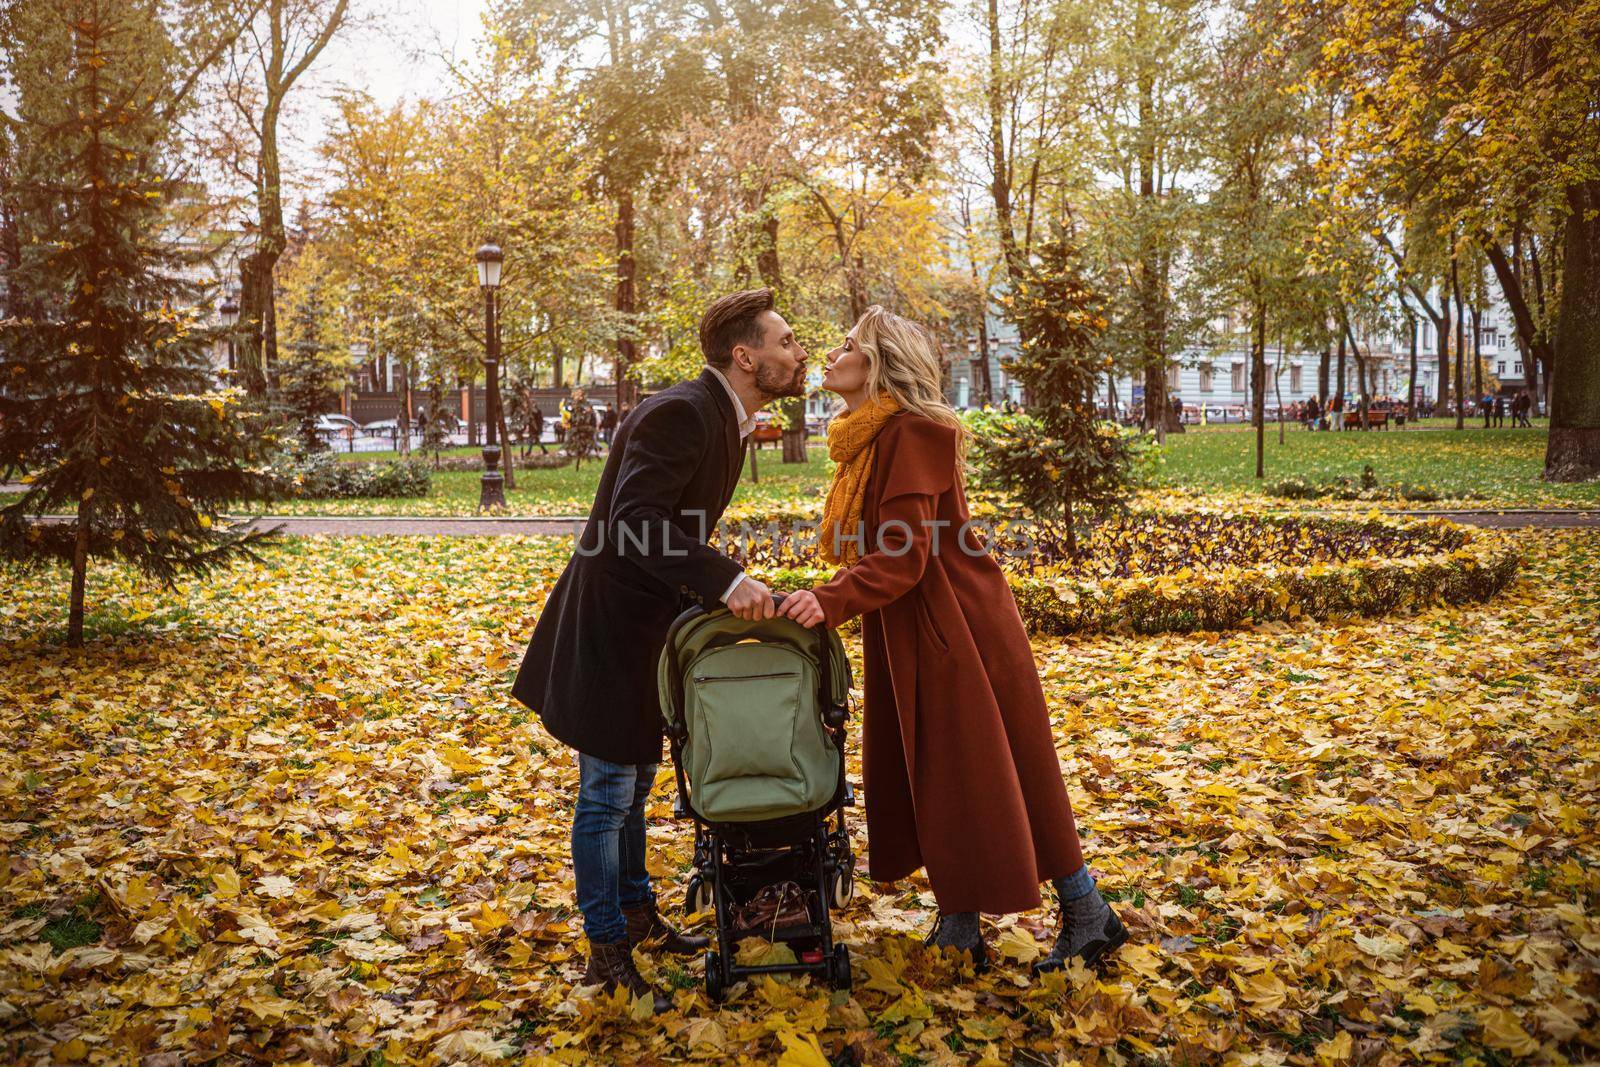 Family walking in an autumn park with a newborn baby in a stroller. Family outdoors in a golden autumn park. Tinted image. 